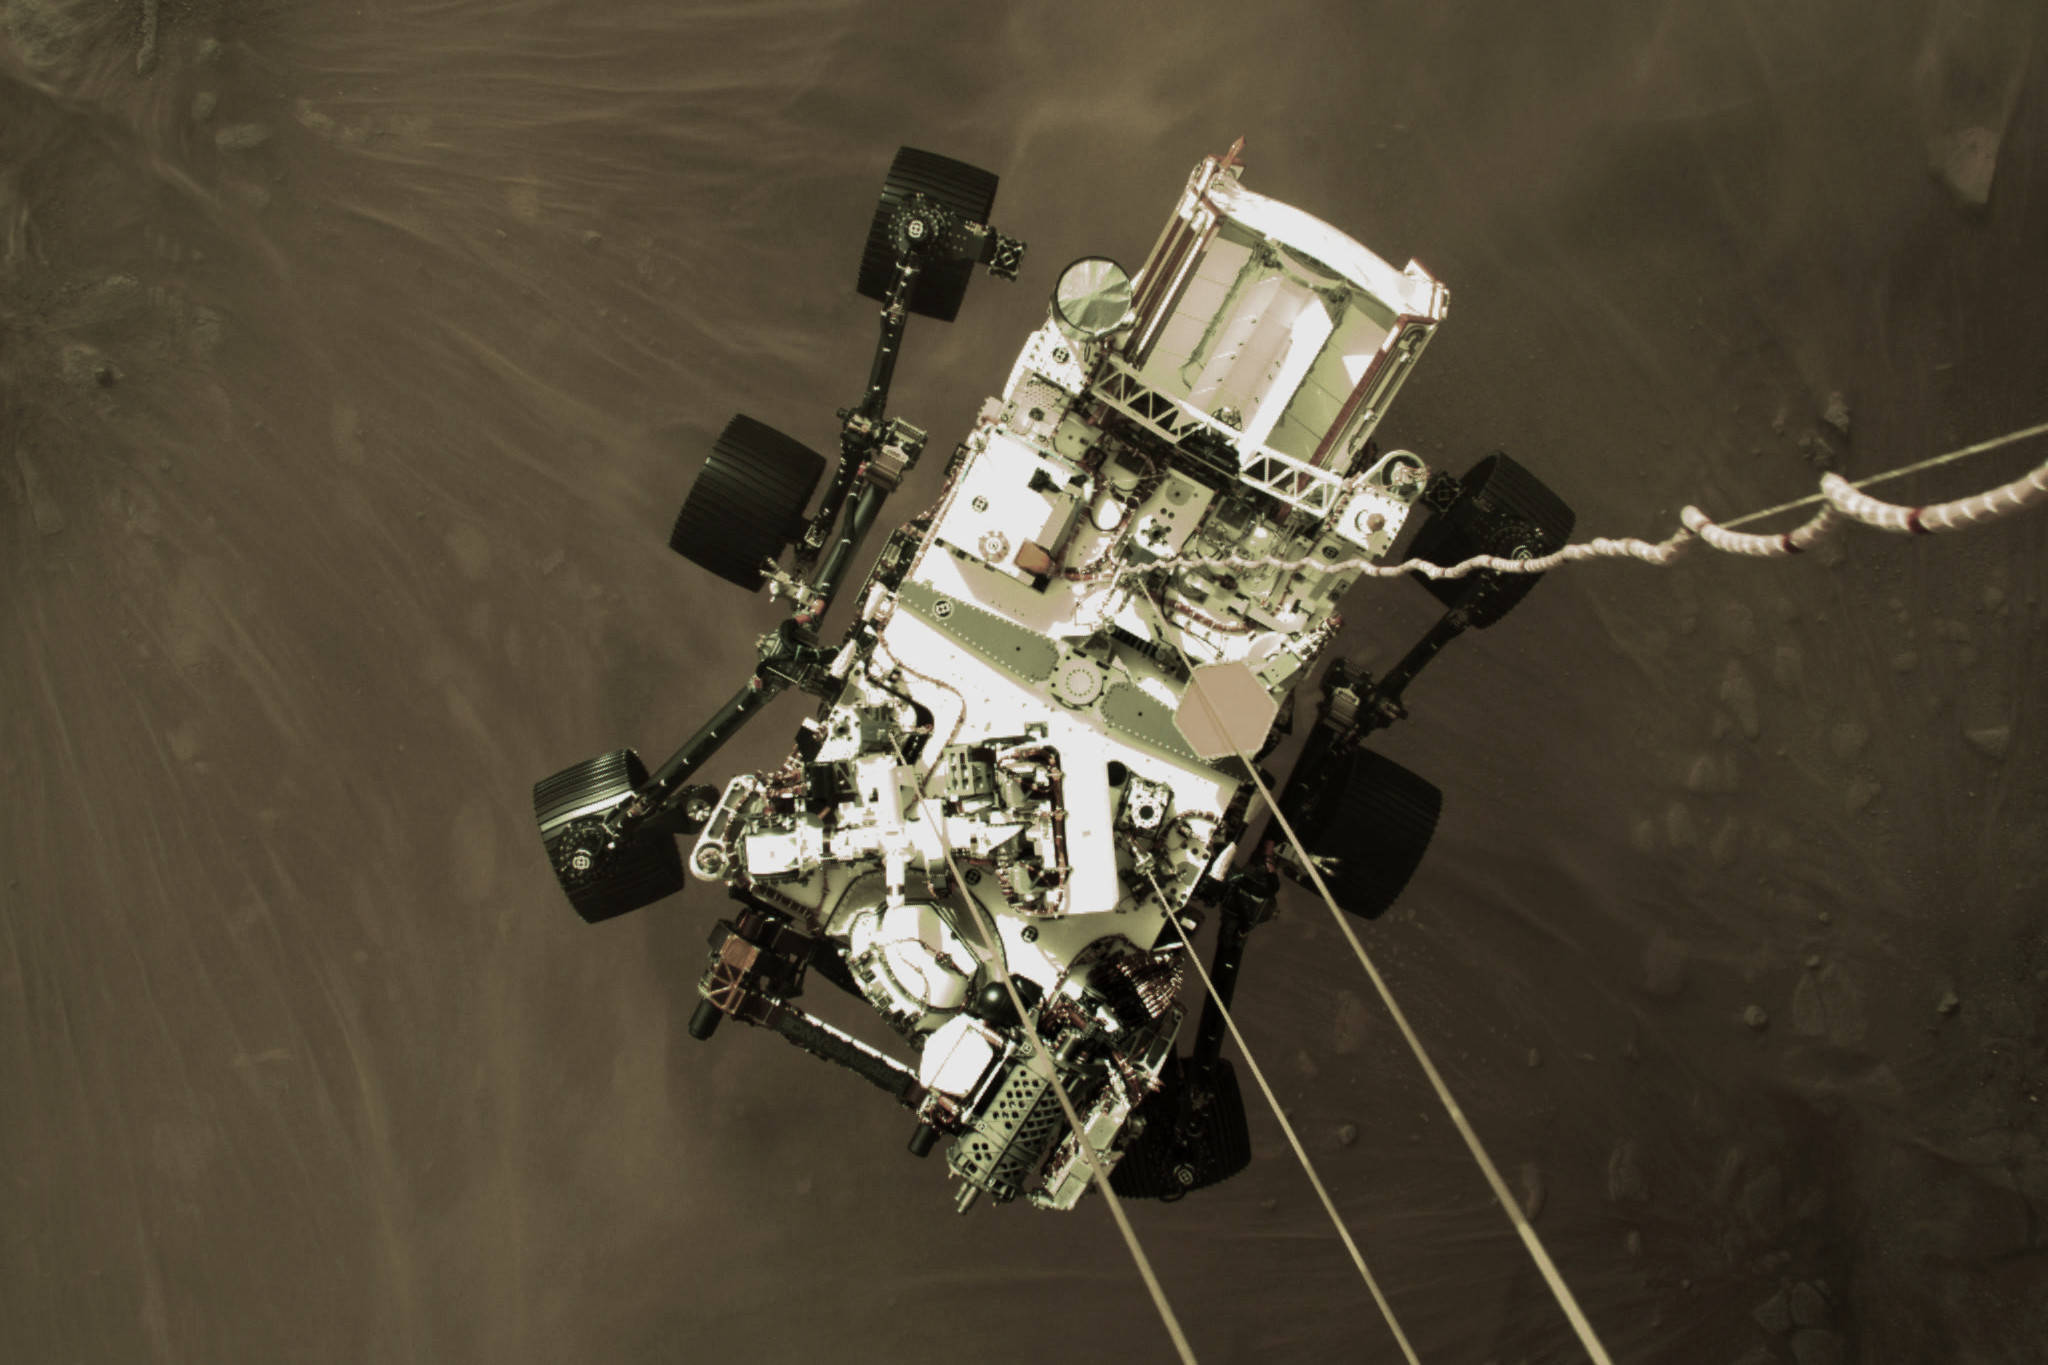 The Perseverance rover, seen here from the descent stage, landed on Mars on Feb. 18, 2021. (Courtesy photo / NASA)